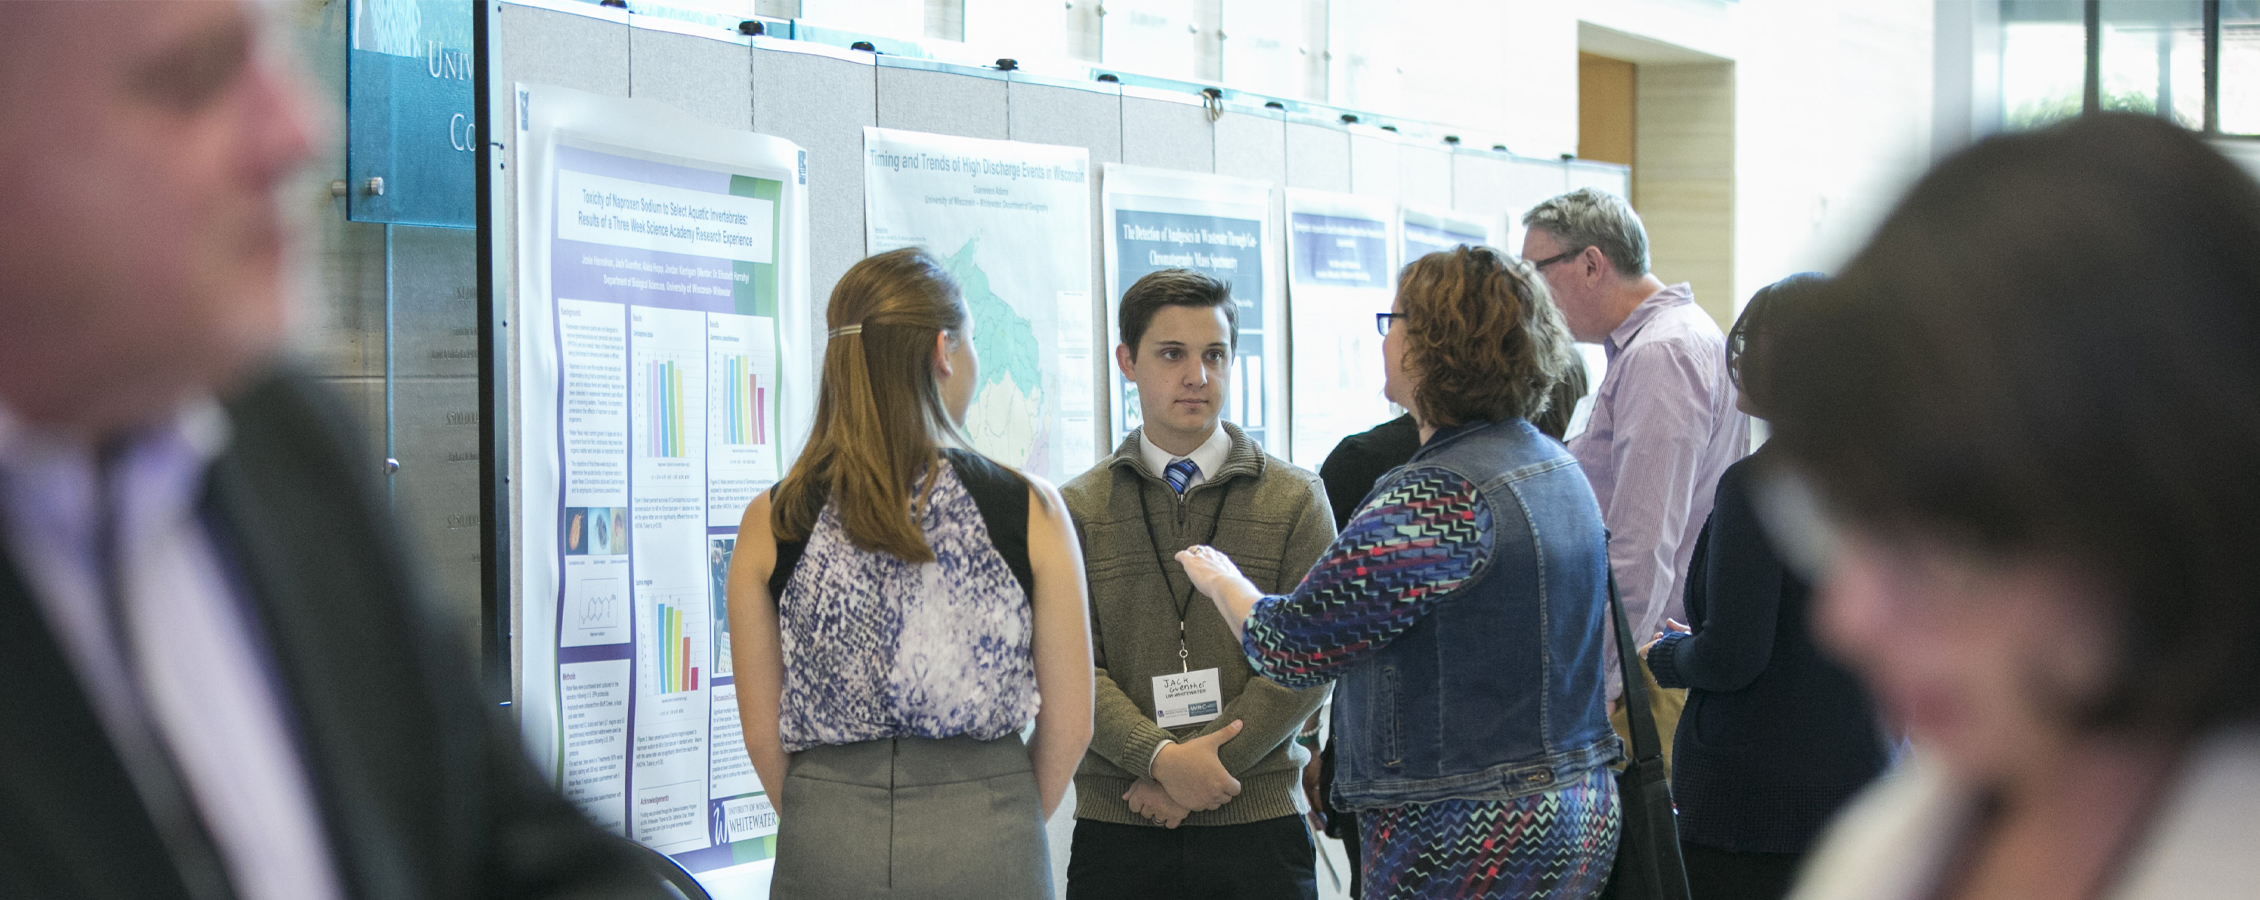 A student presents their research at a water research conference.